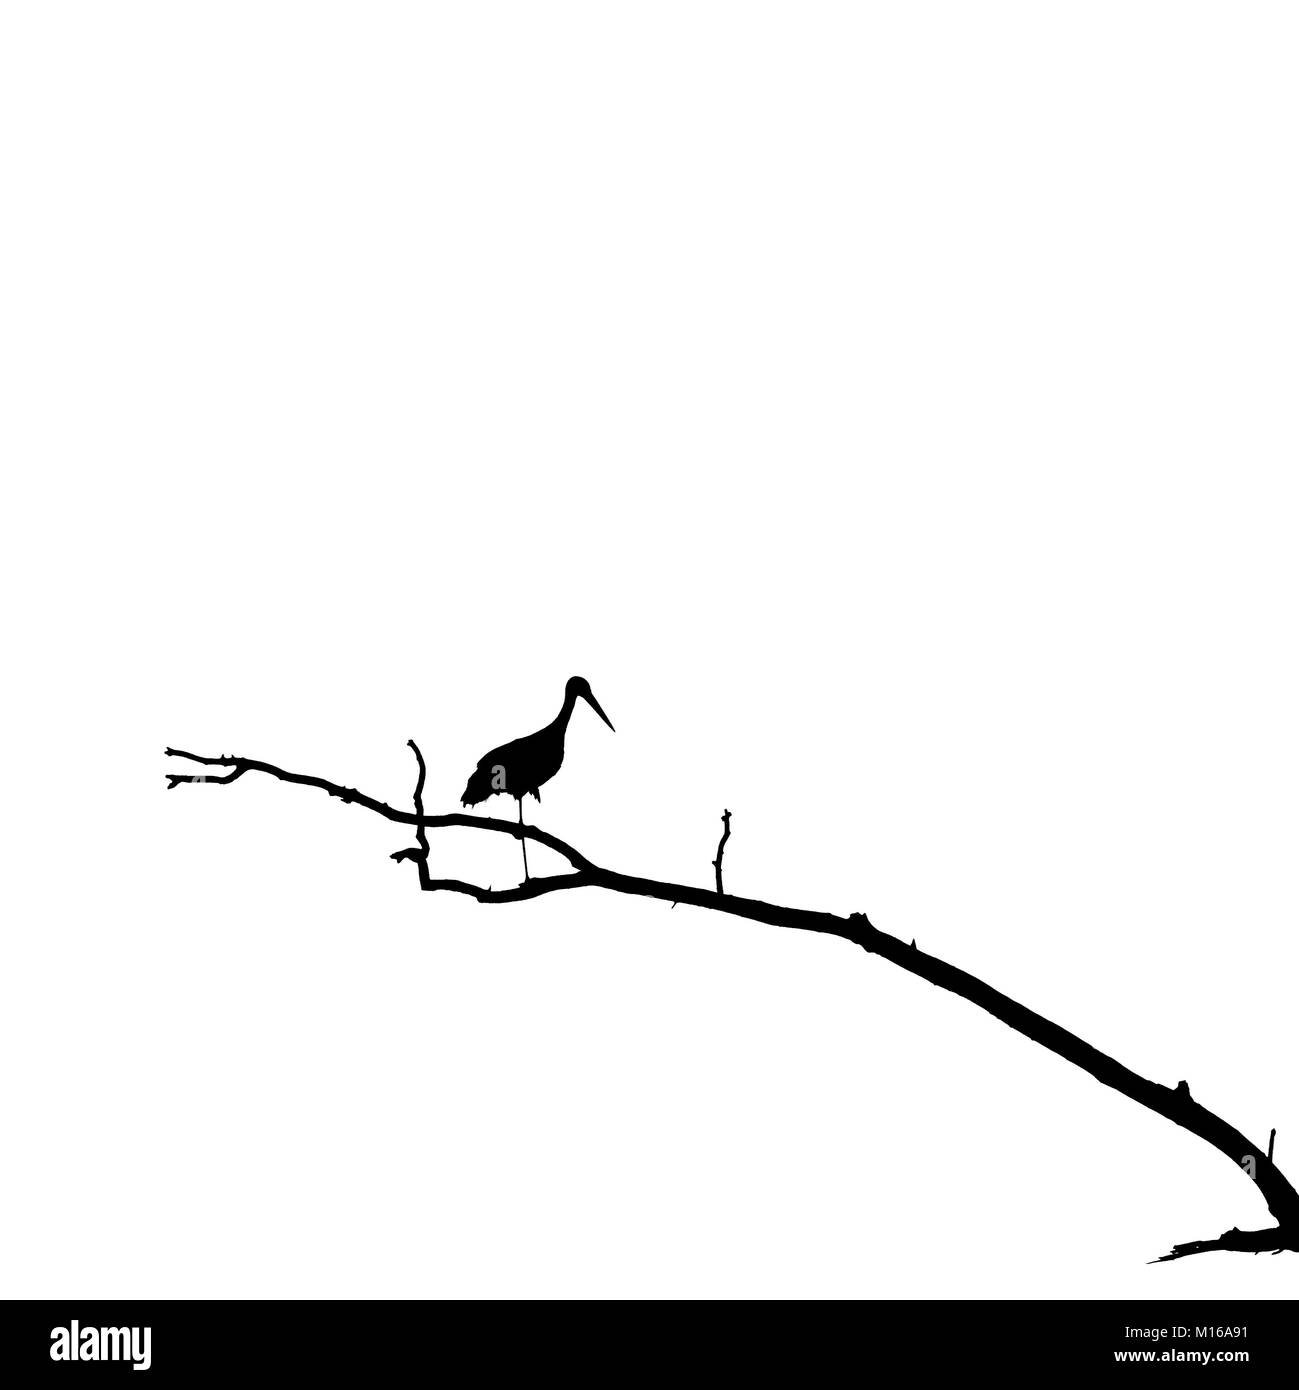 Silhouette of Stork Standing on One Leg on Dry Tree Branch. Black and white image id based on photo. Stock Photo